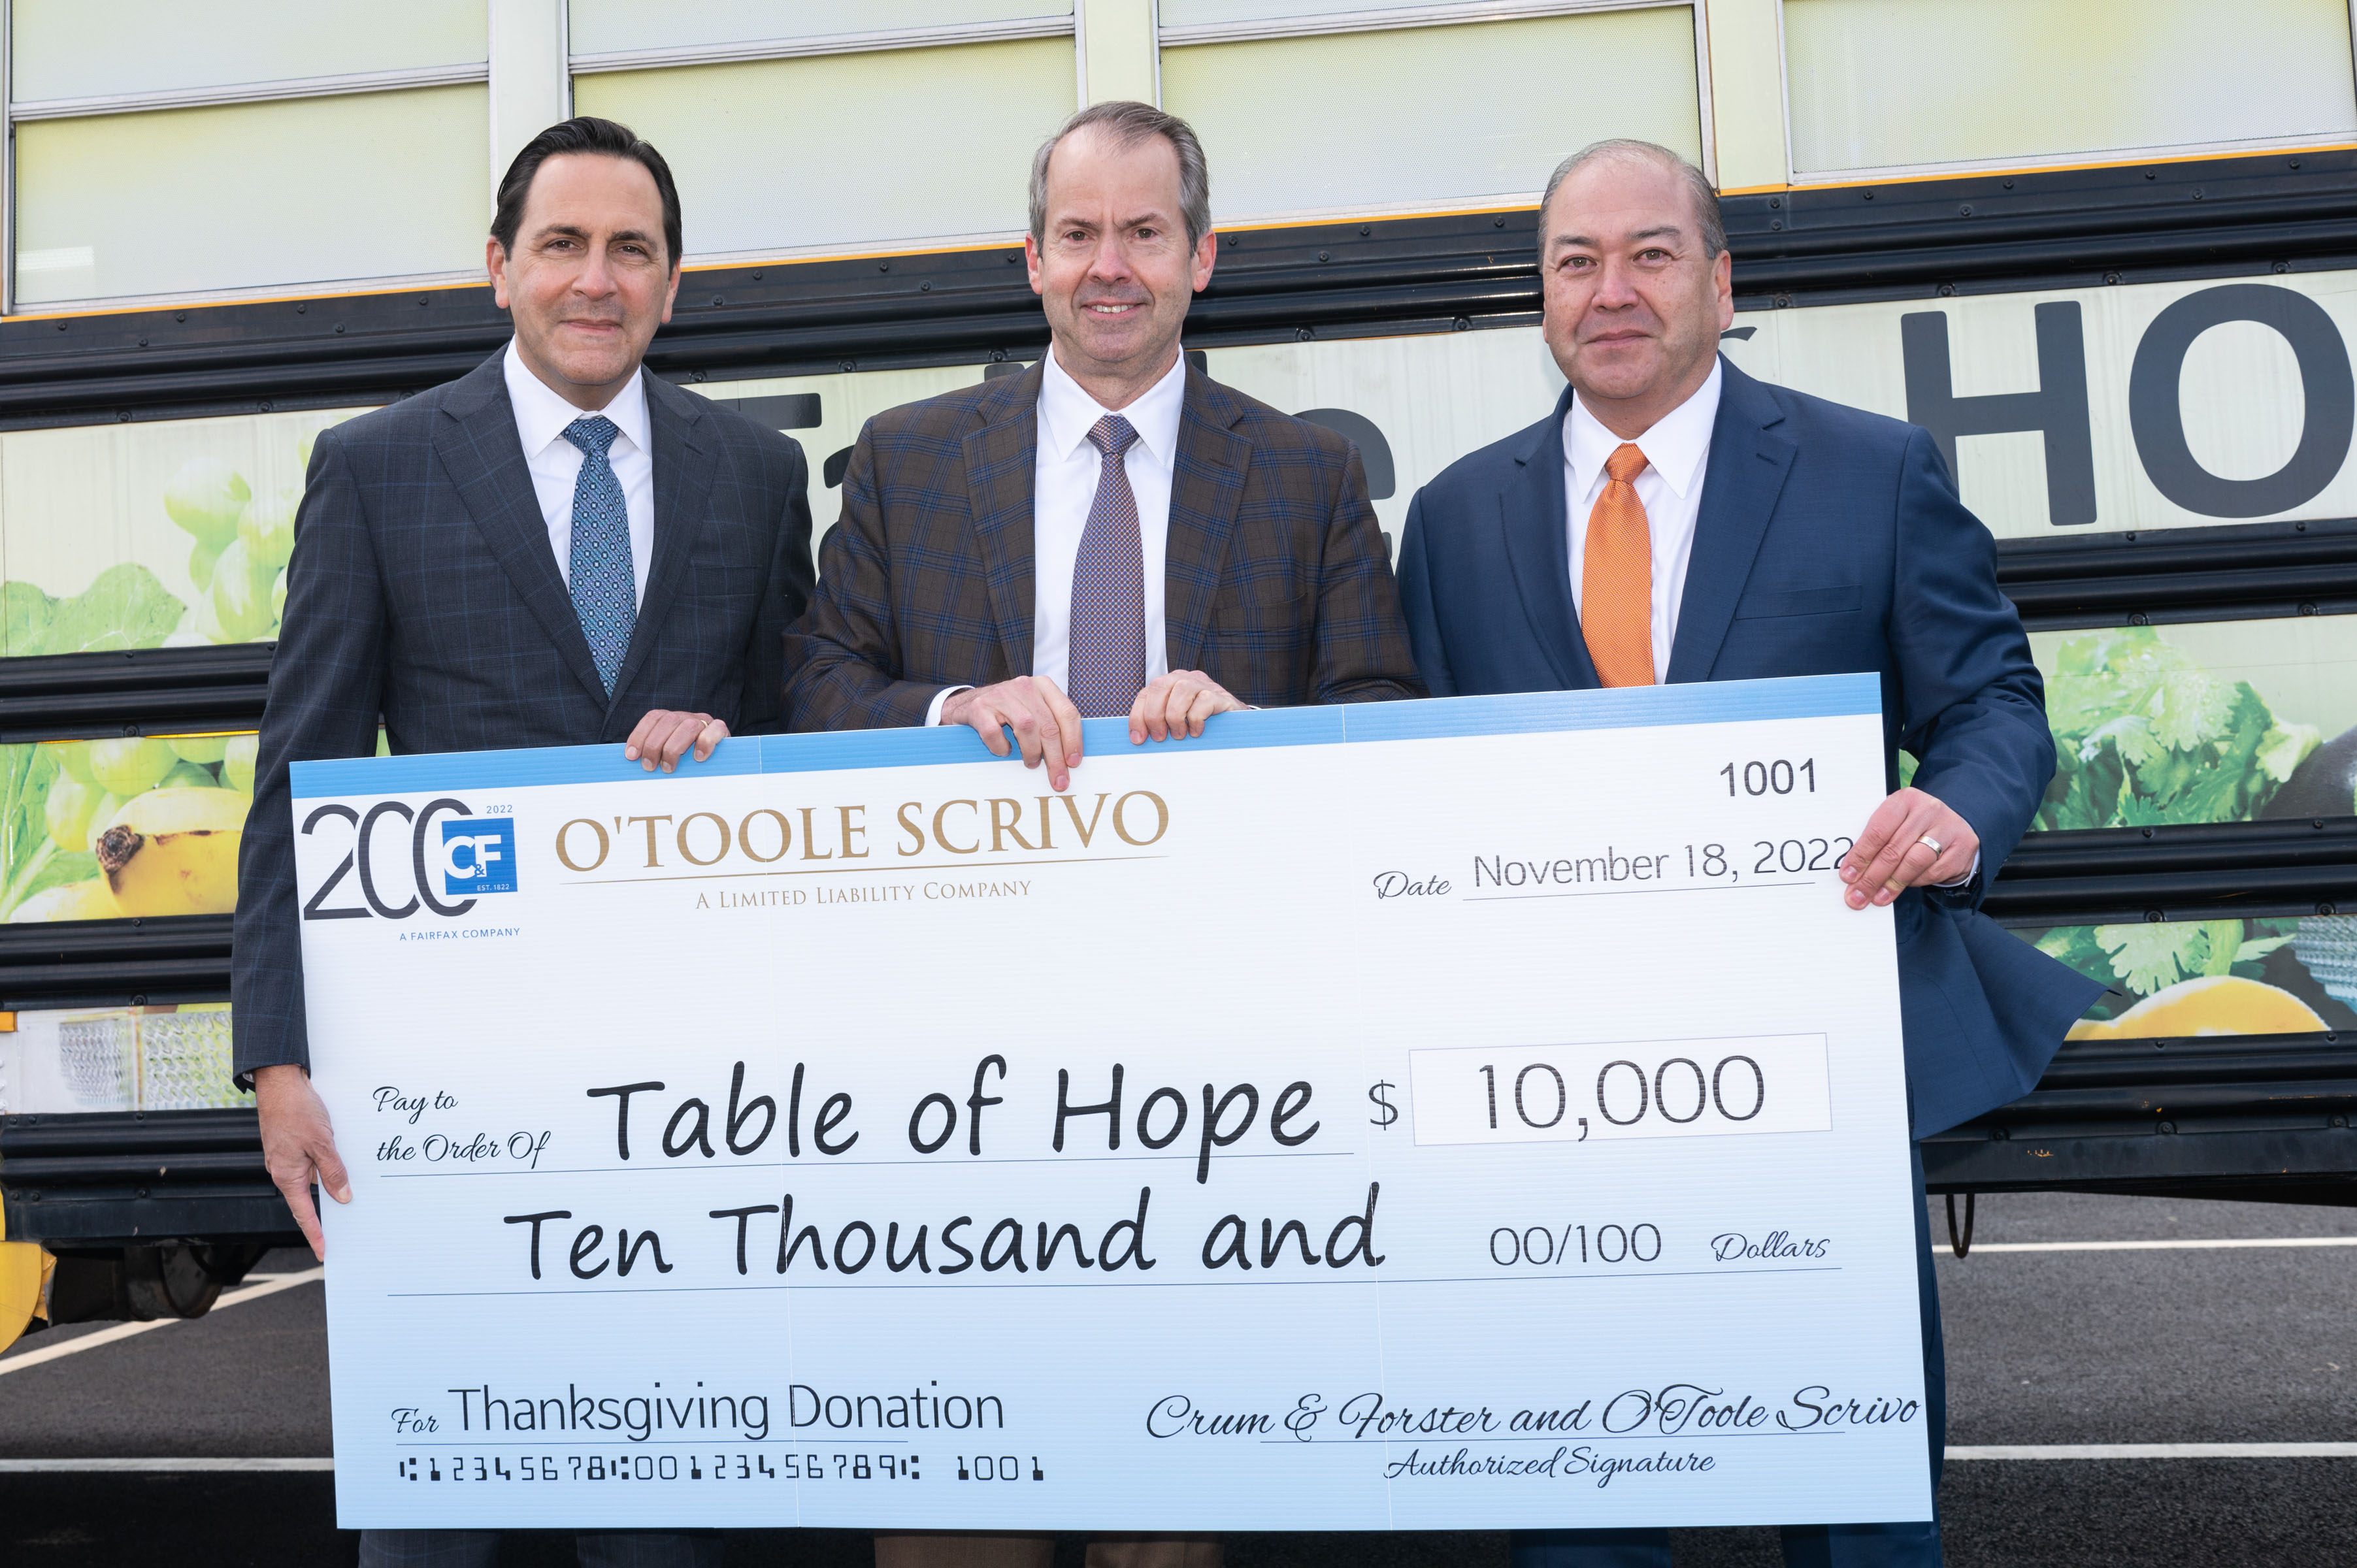 OS and Crum & Forster Donate $80,000 to Food Banks in Time for Thanksgiving